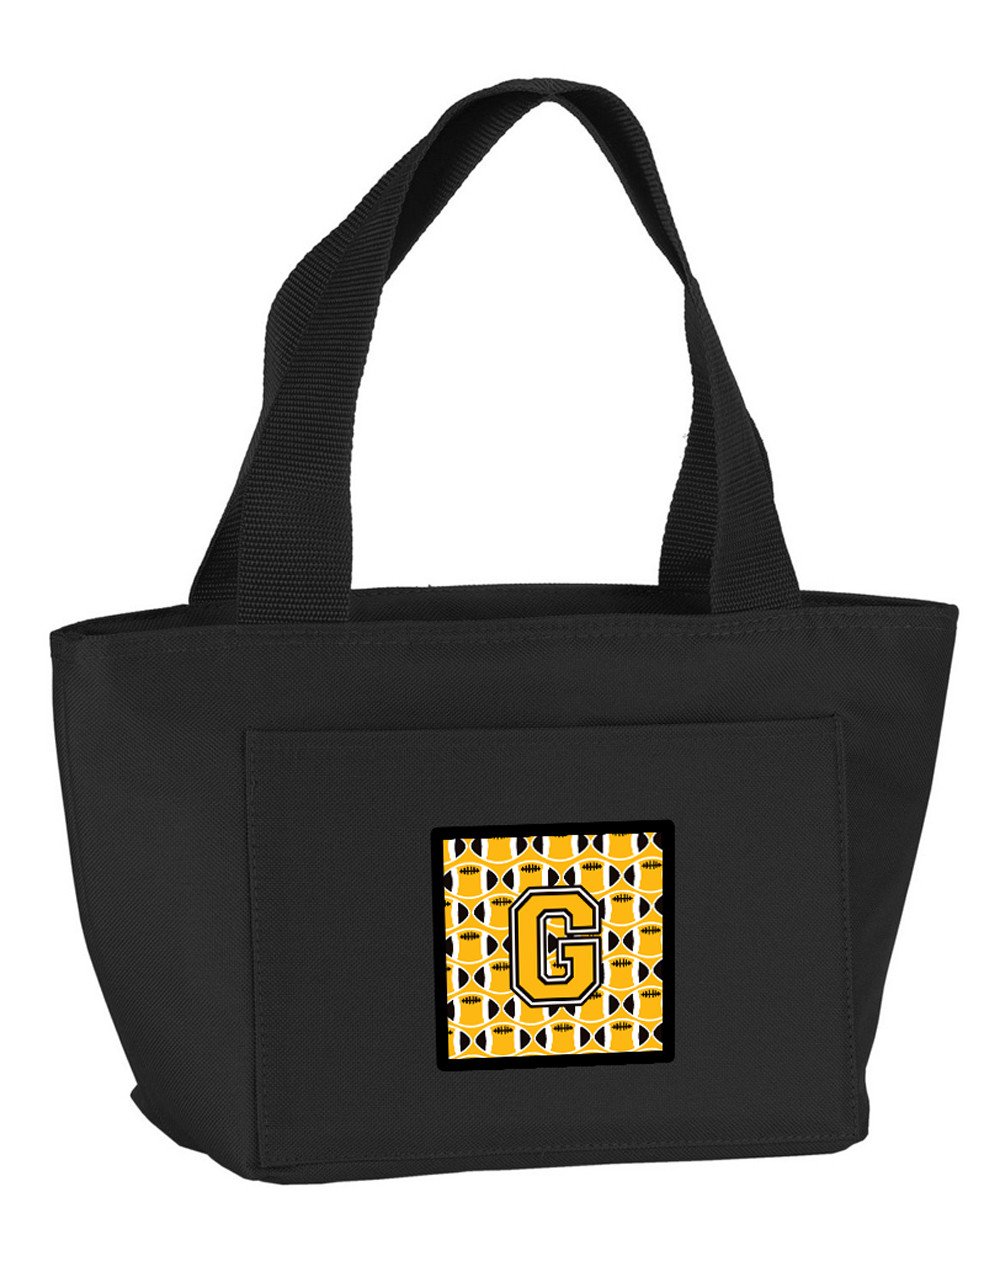 Letter G Football Black, Old Gold and White Lunch Bag CJ1080-GBK-8808 by Caroline's Treasures